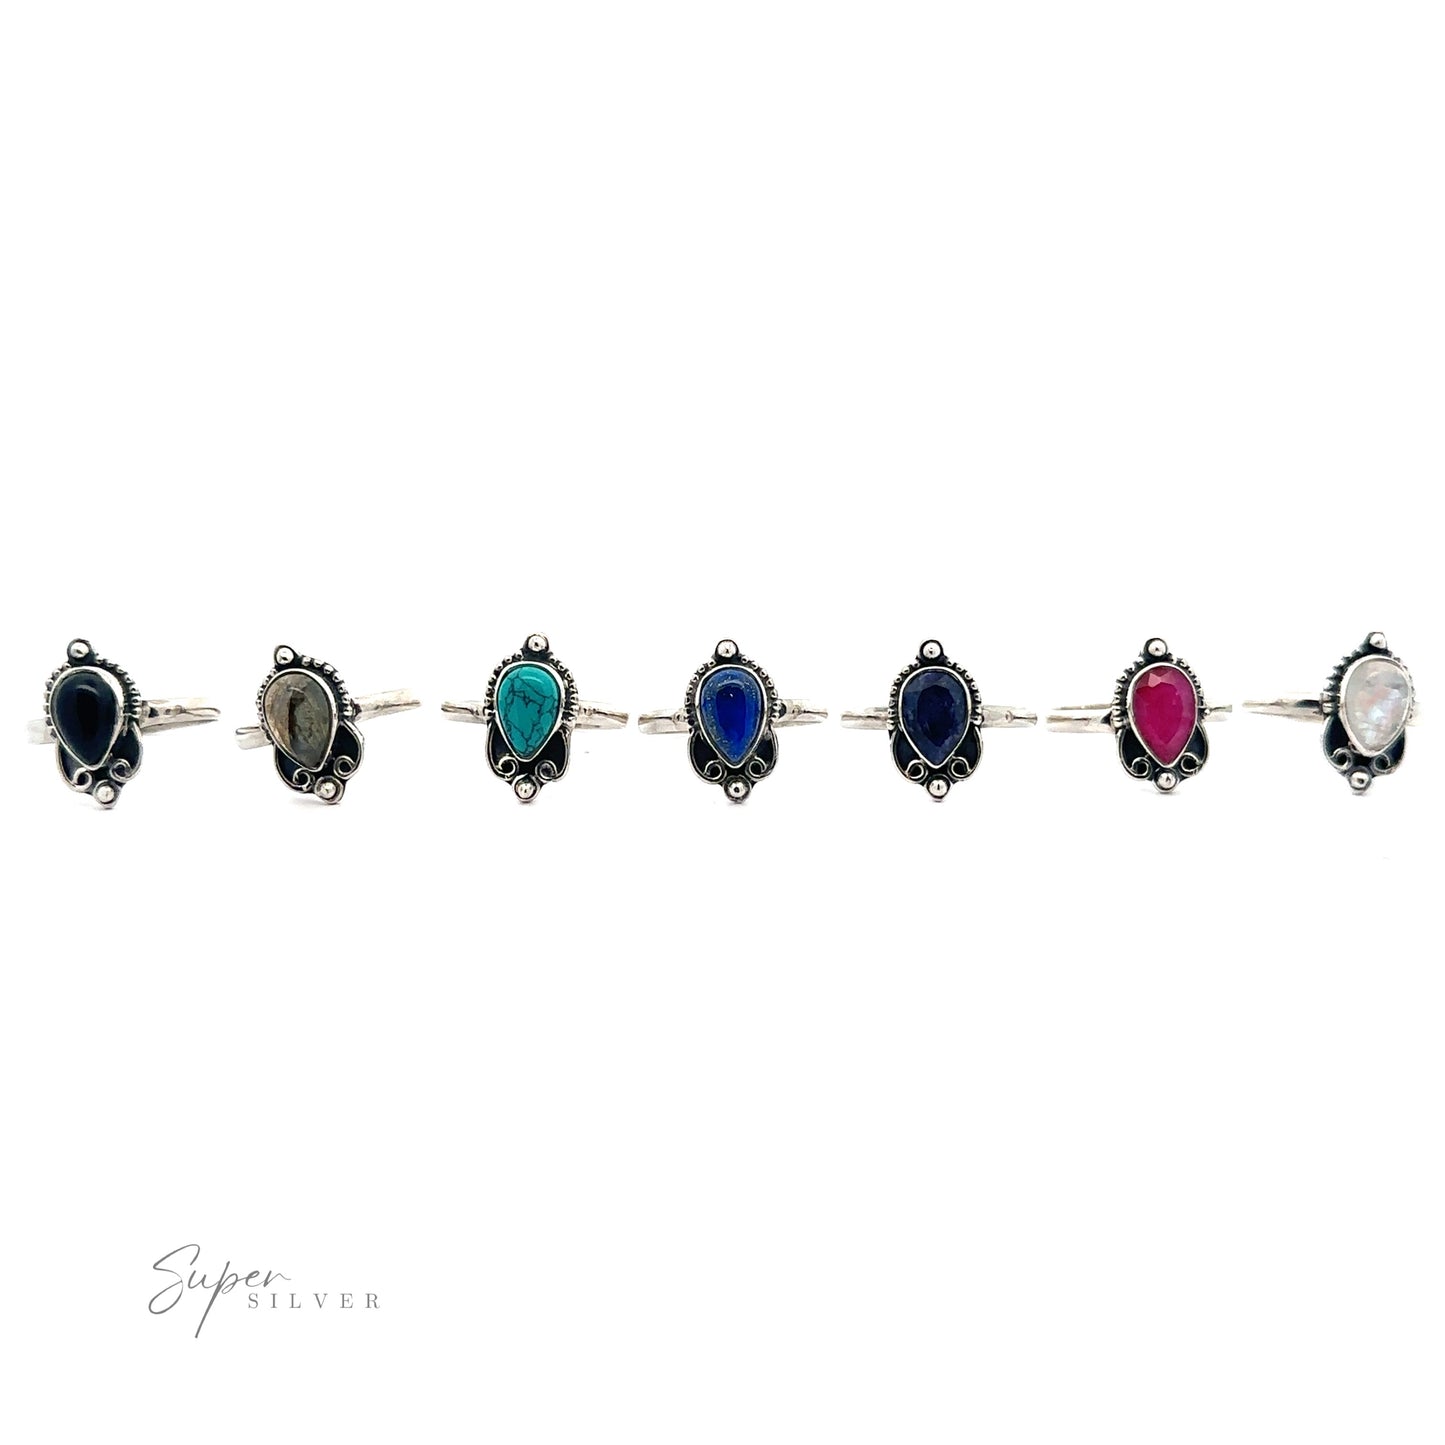 
                  
                    A Vintage Inspired Teardrop Gemstone Ring with alternating oval gemstones in black, green, blue, red, and white, set against a white background.
                  
                